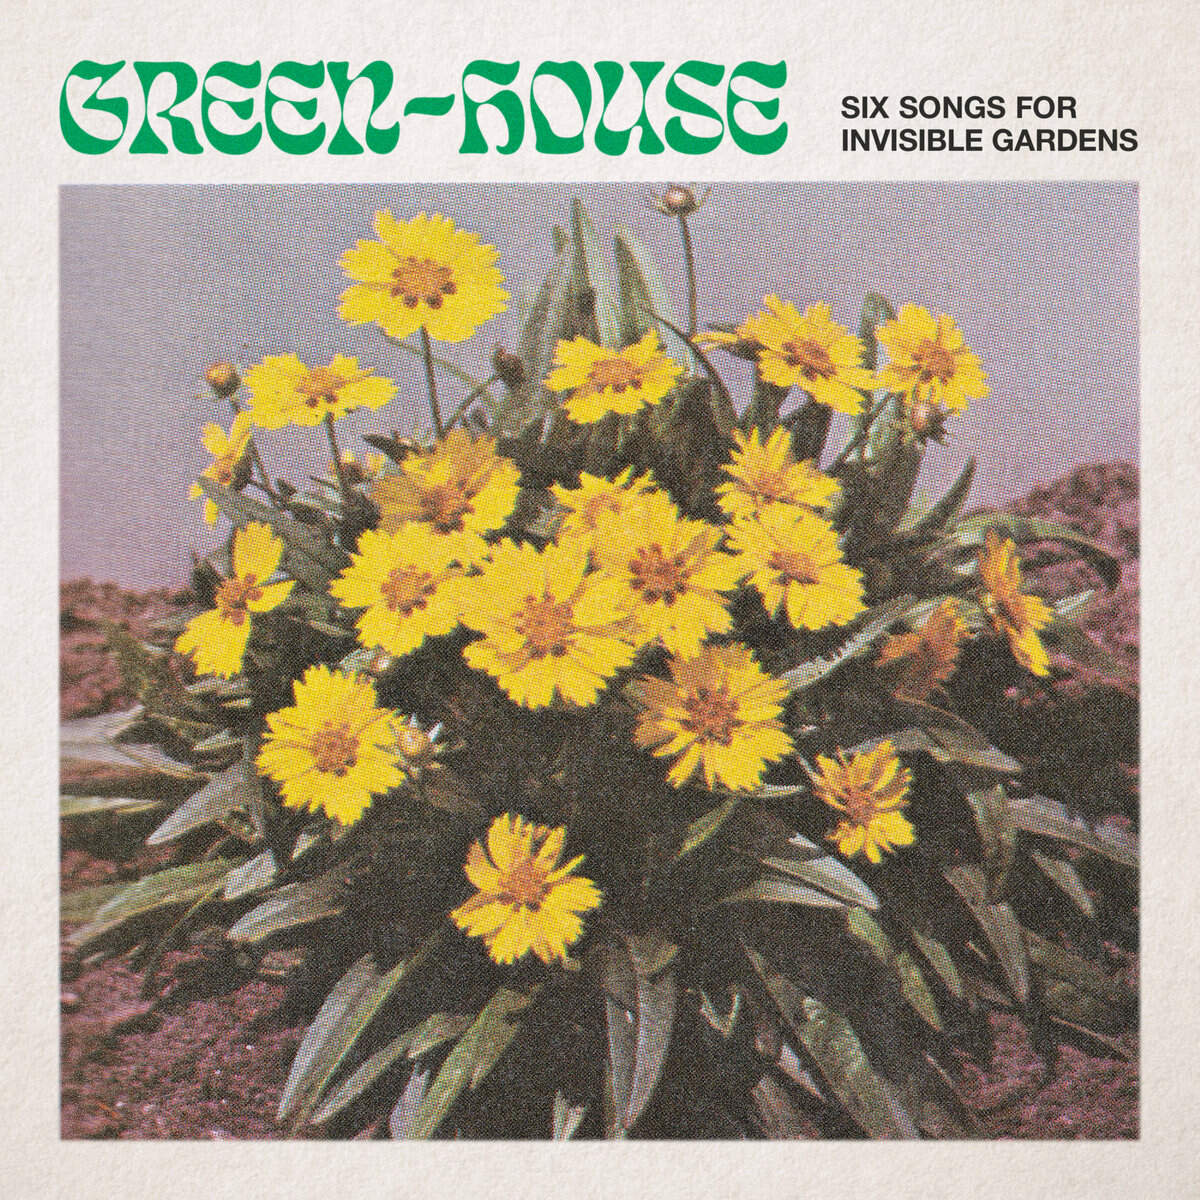 Green-House 'Six Songs for Invisible Gardens' LP (Love Record Stores)